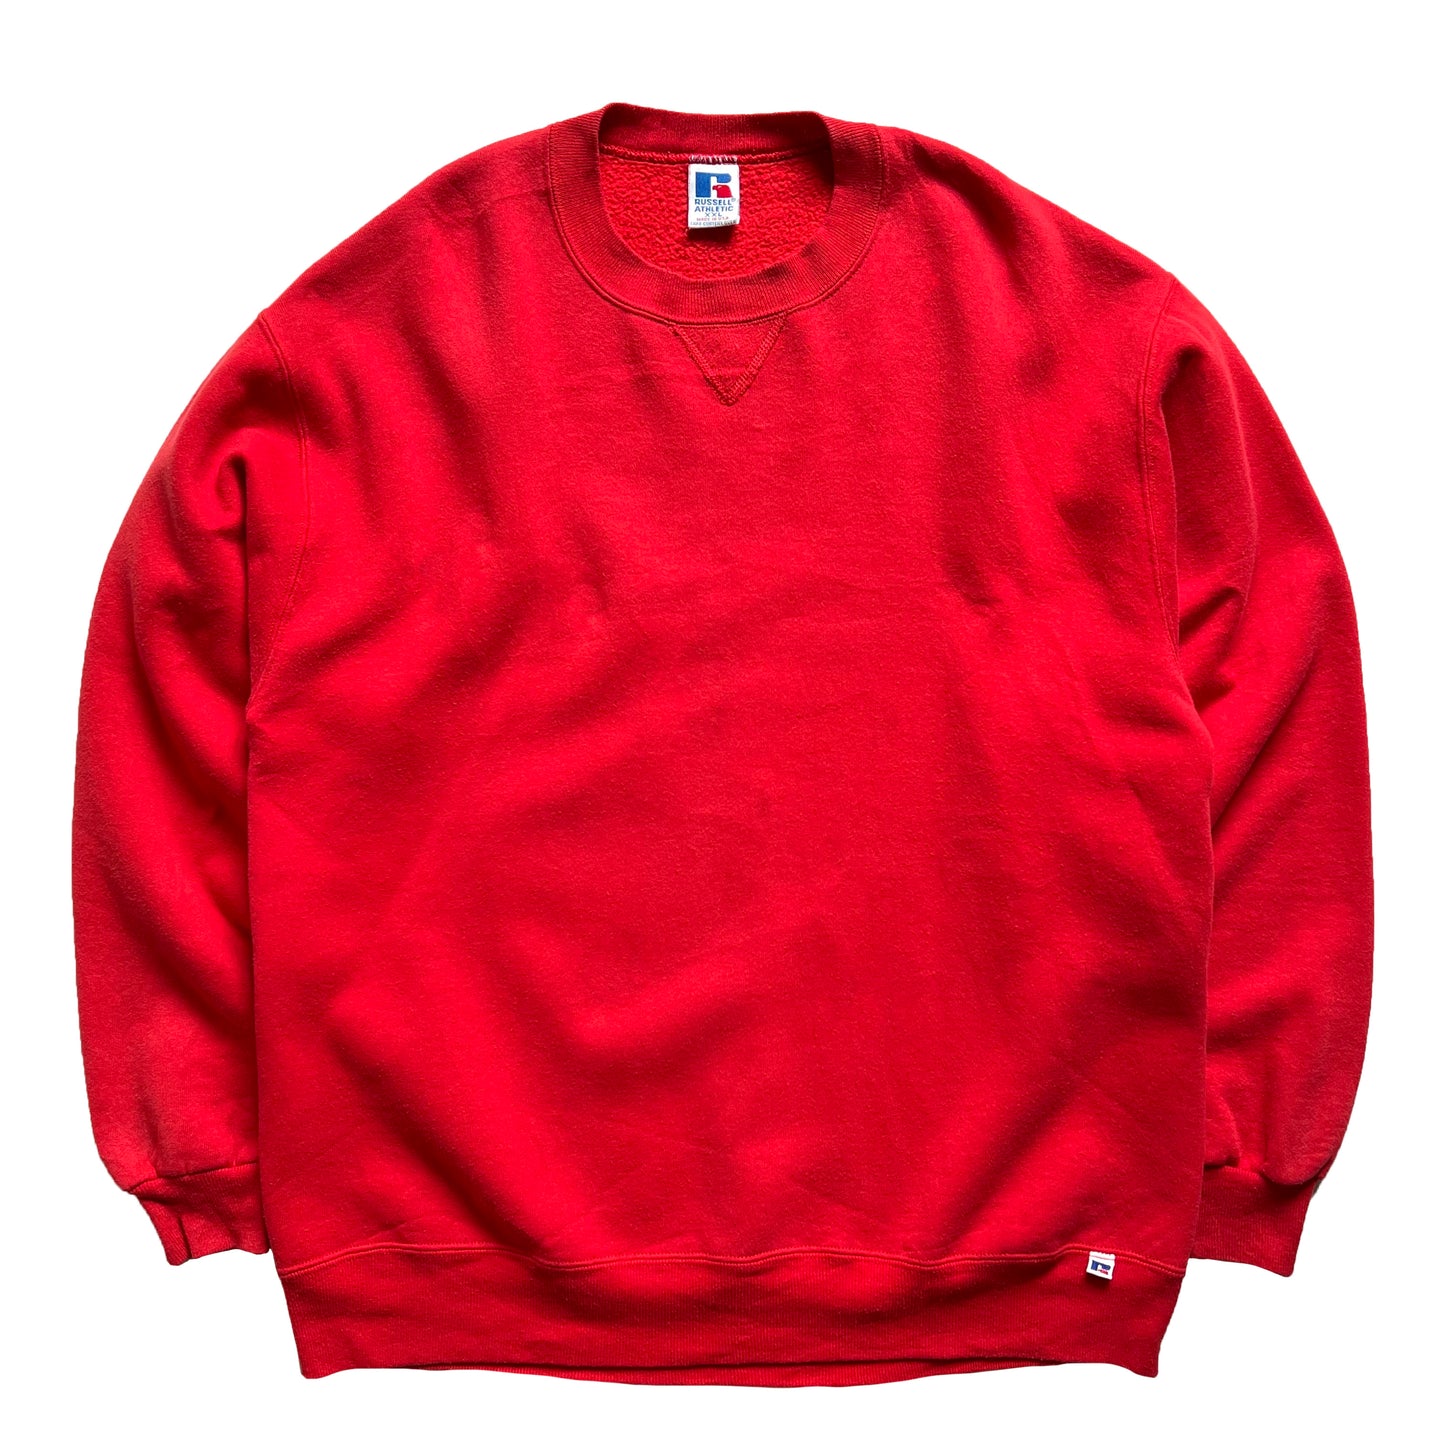 90's RUSSELL ATHLETIC "RED" BLANK SWEATSHIRT "MADE IN USA"